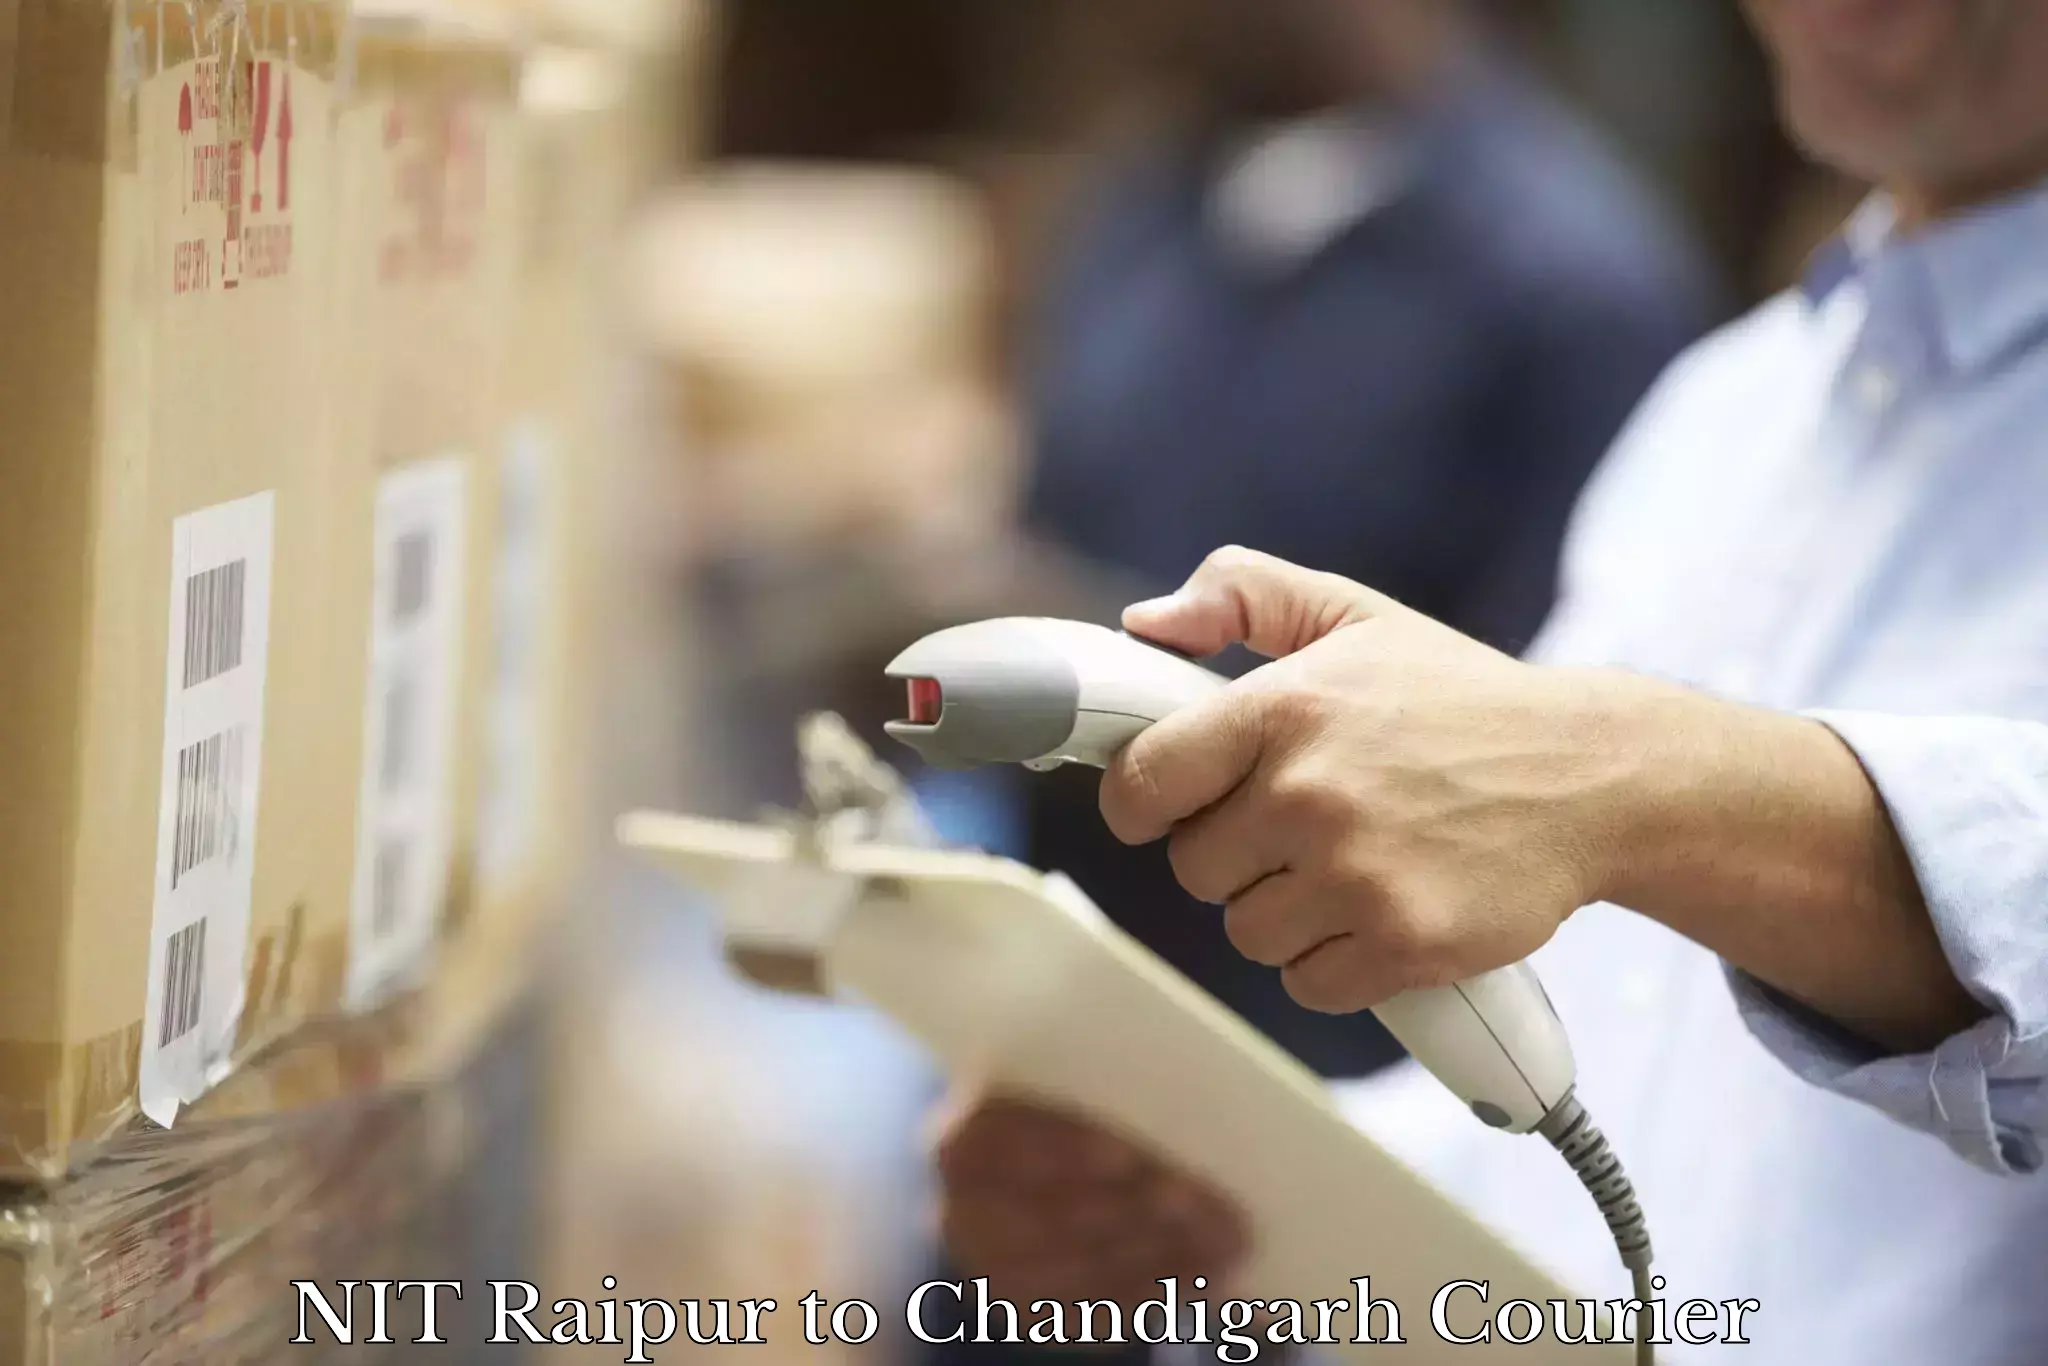 Global shipping solutions NIT Raipur to Chandigarh